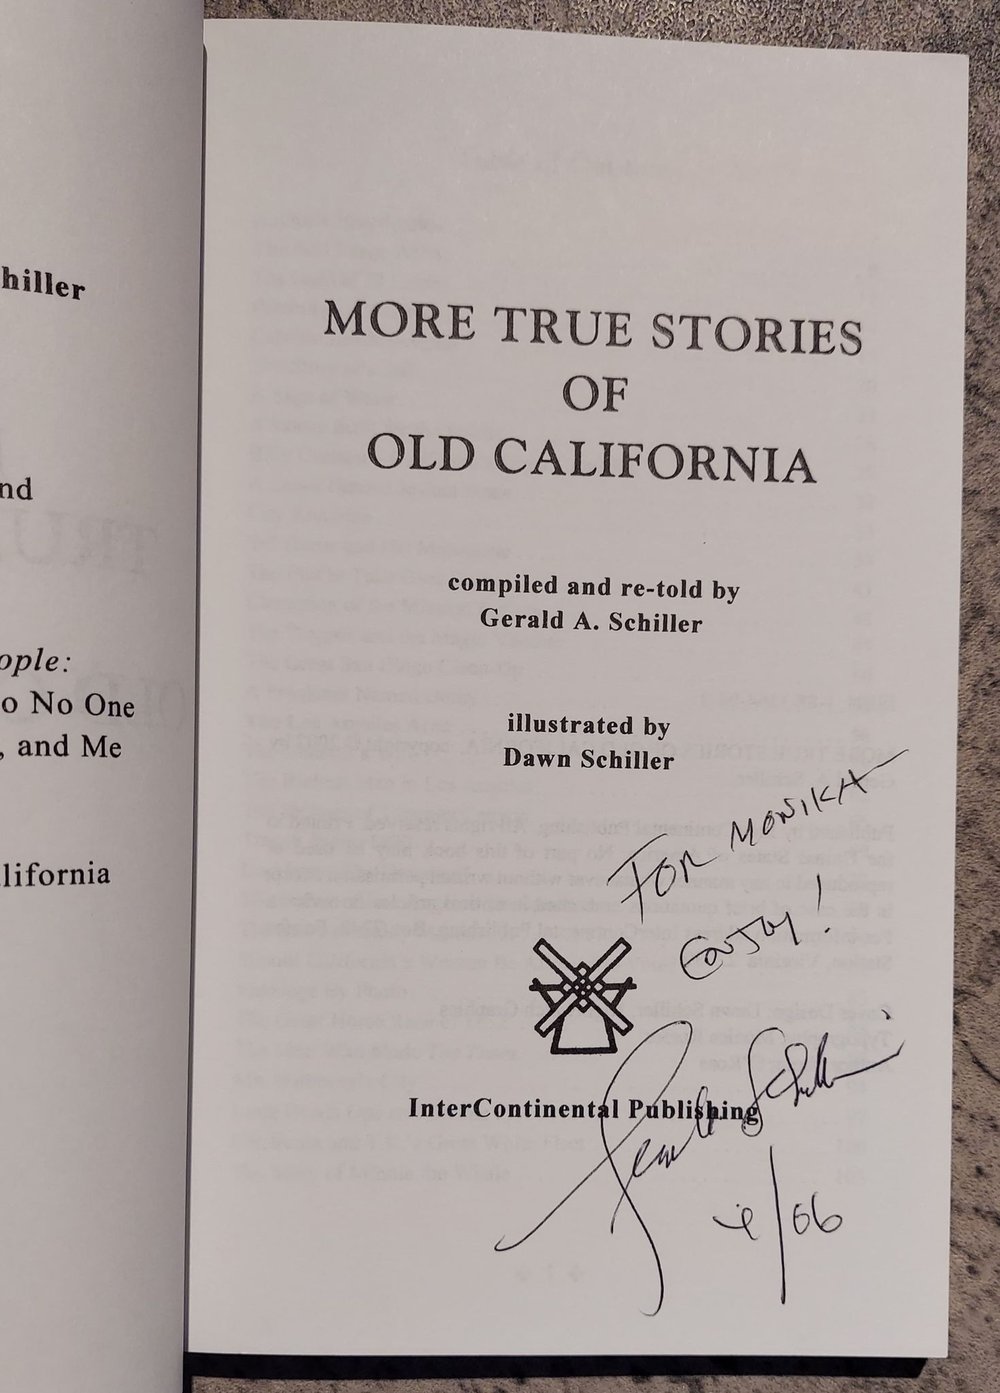 More True Stories of Old California, by Gerald A. Schiller - SIGNED